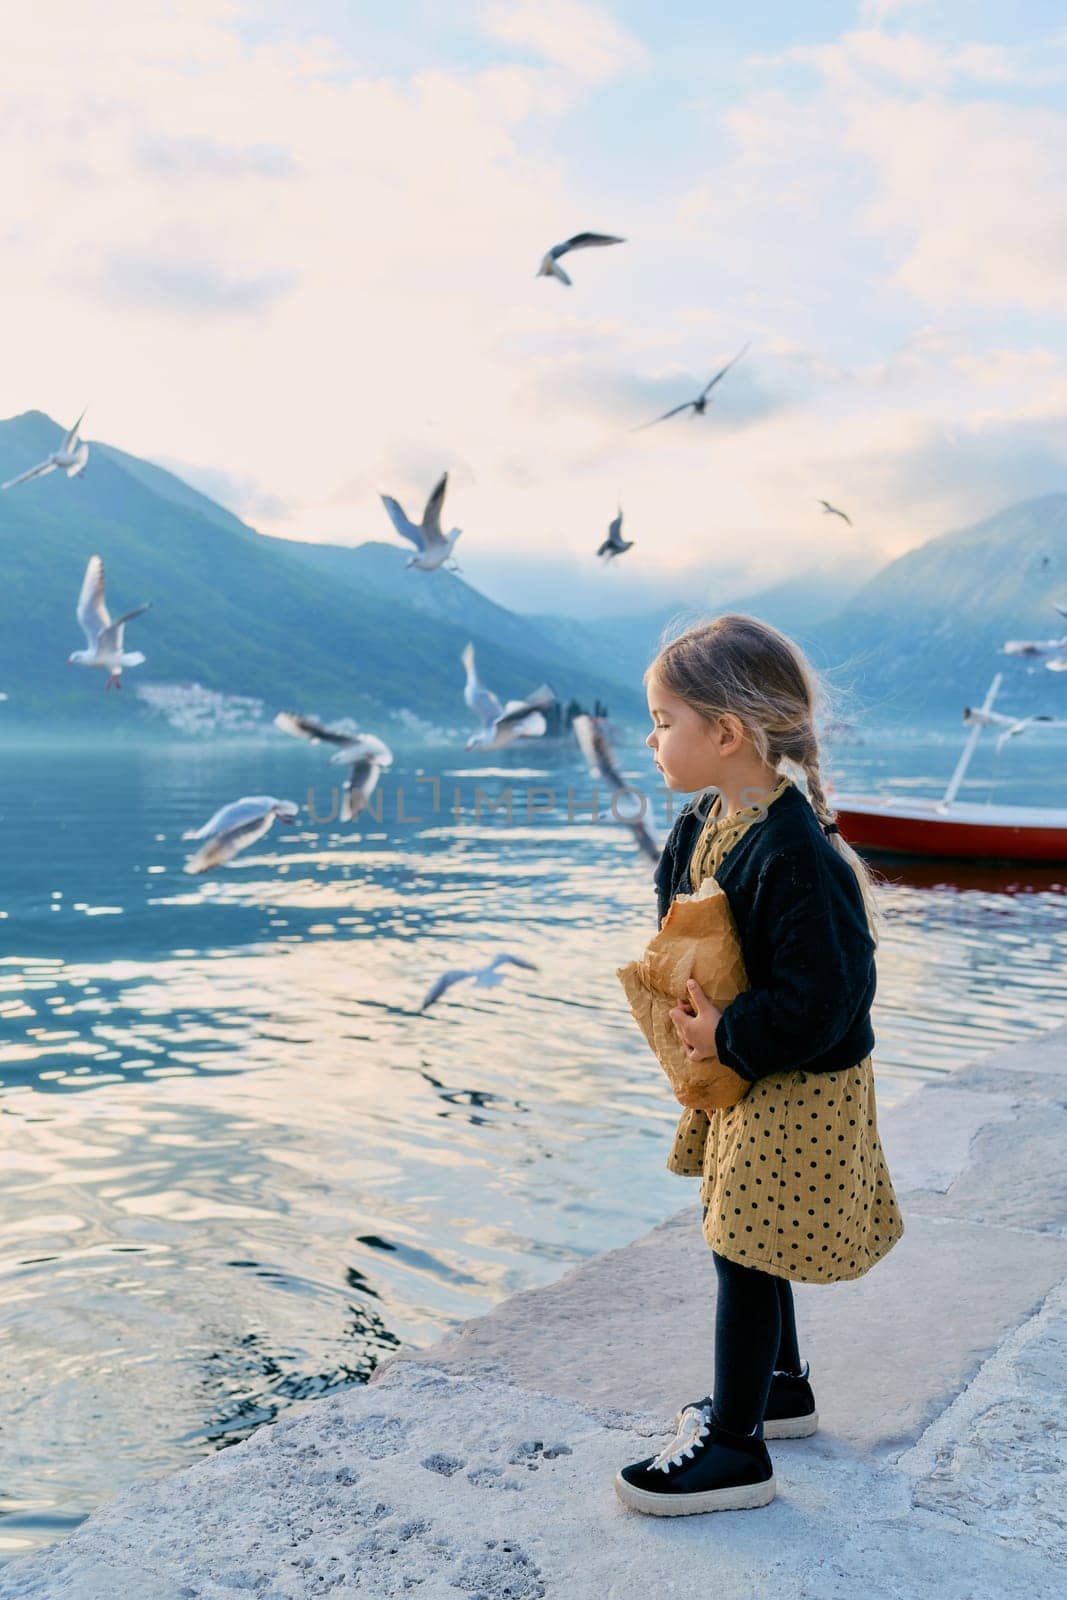 Little girl with a loaf of bread stands on the pier and looks at the flying seagulls by Nadtochiy